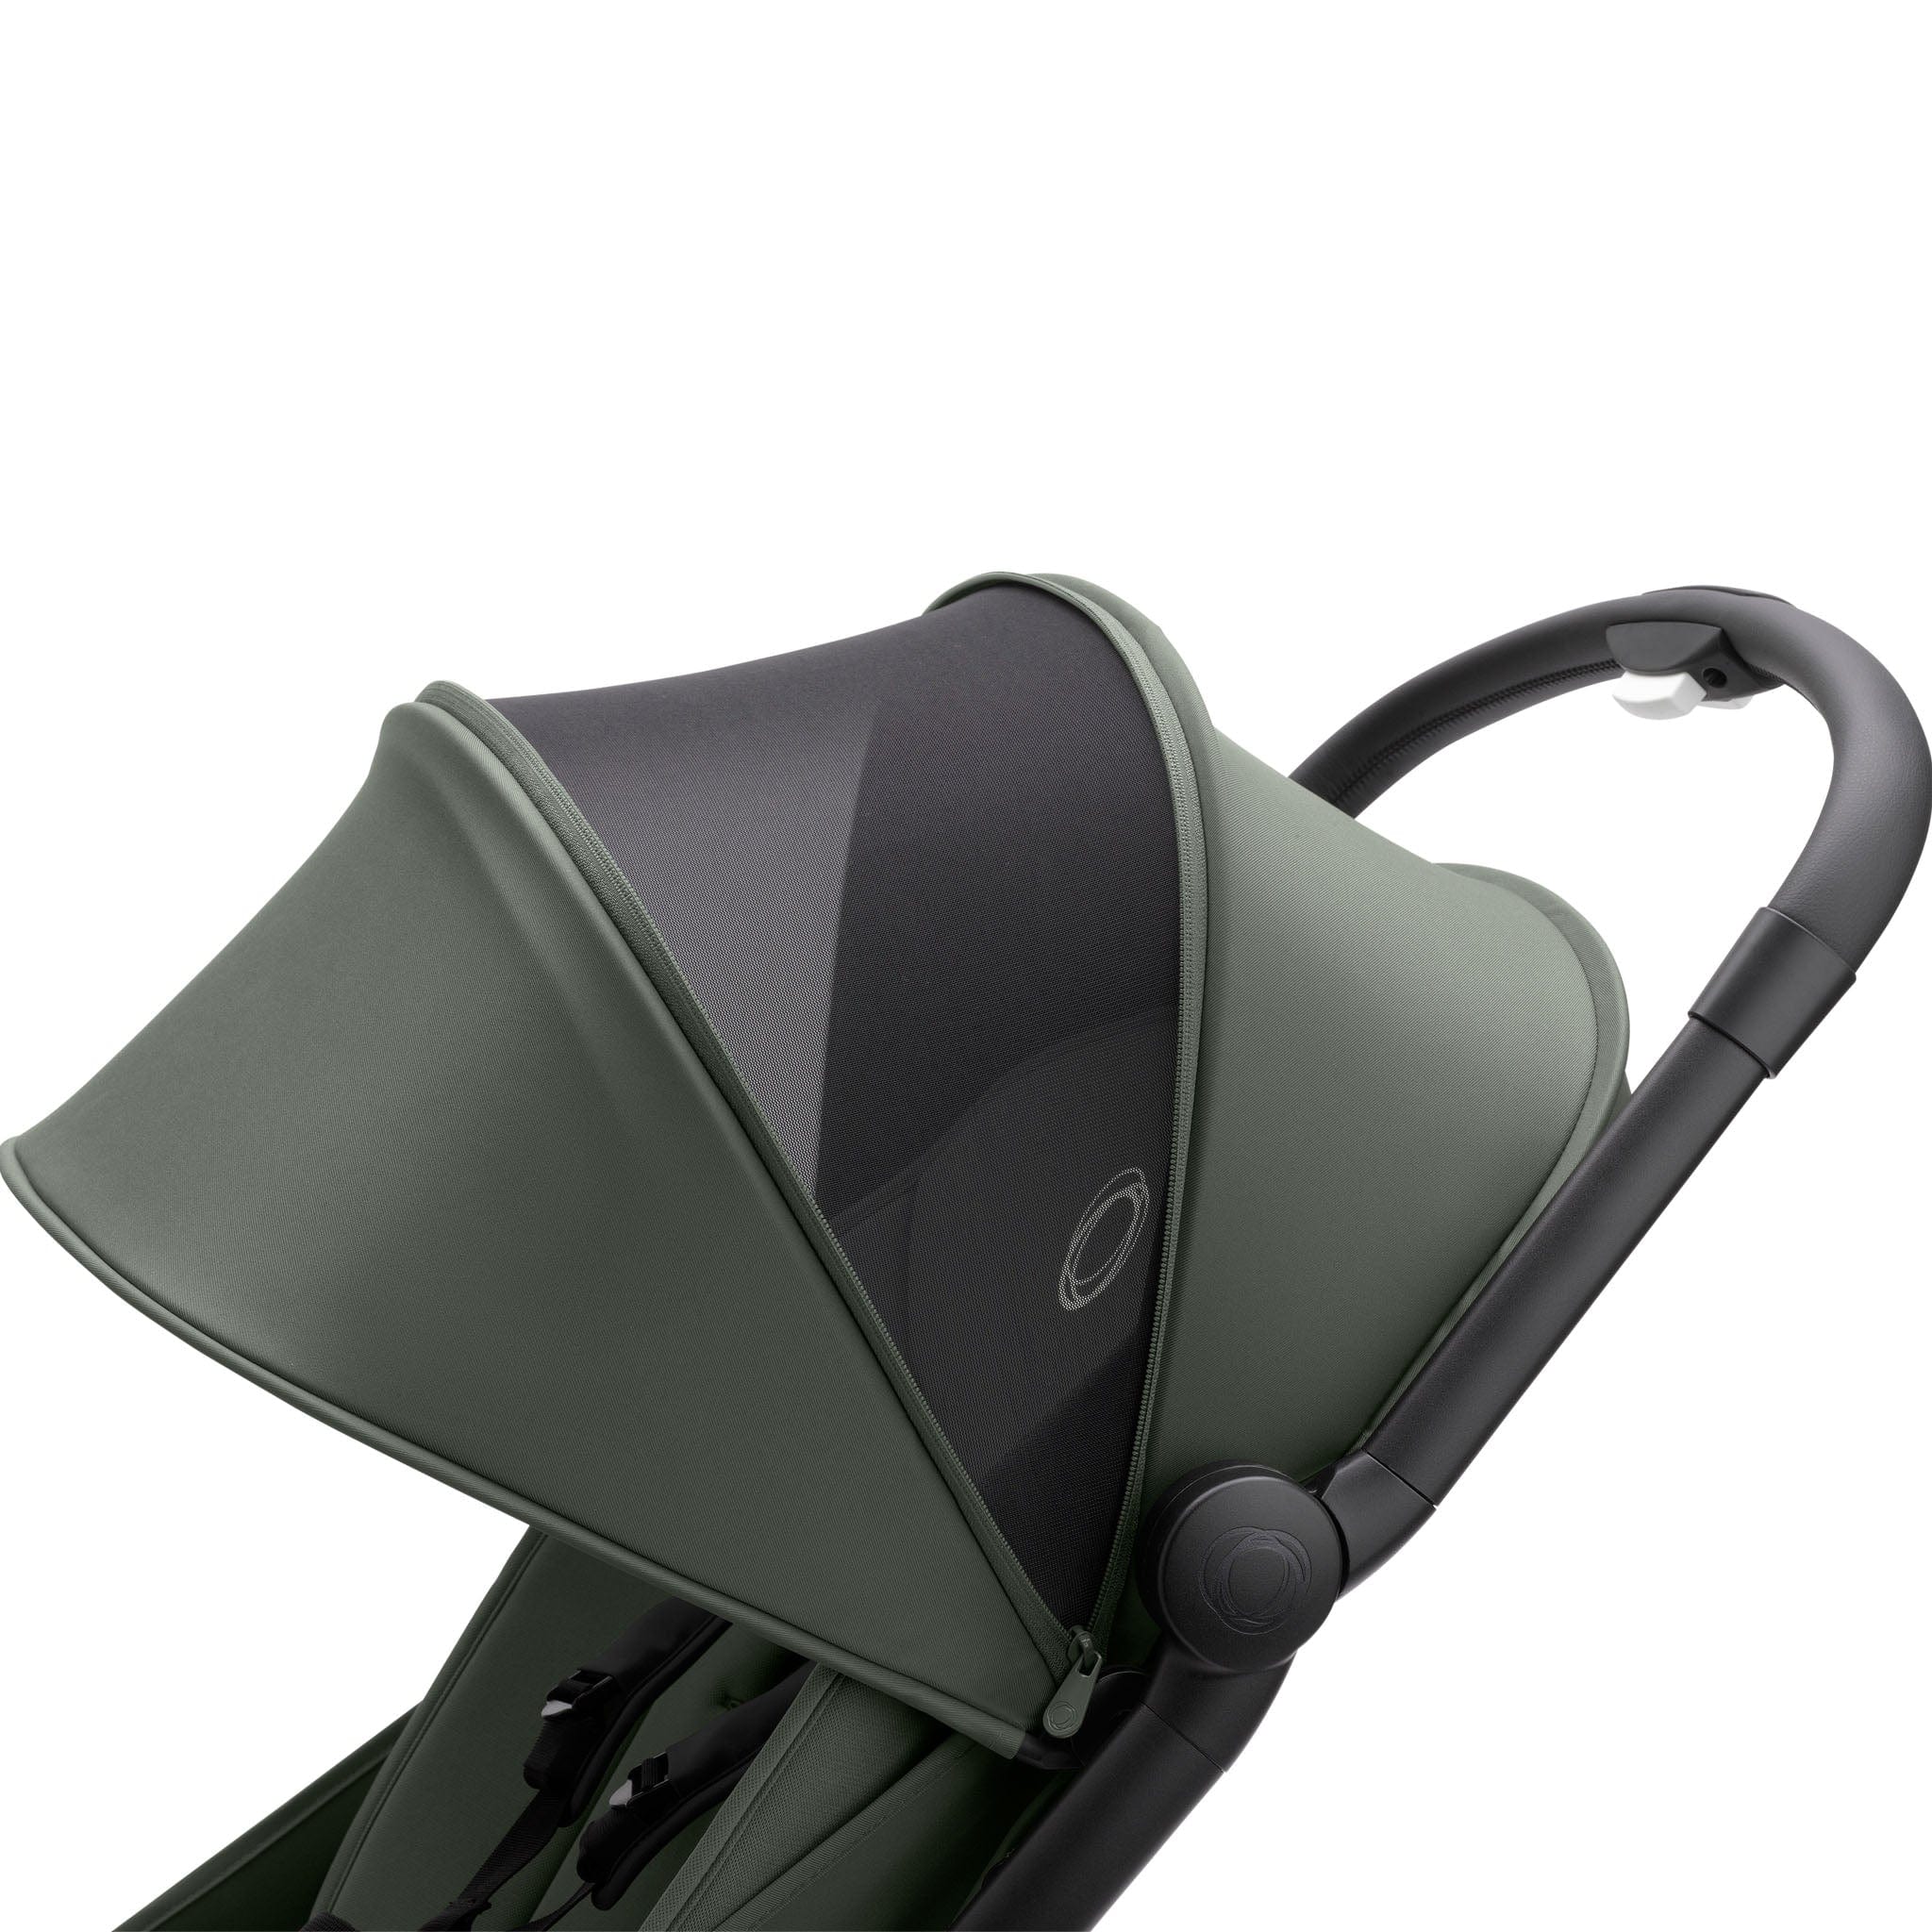 Bugaboo baby pushchairs Bugaboo Butterfly in Forest Green 100025002